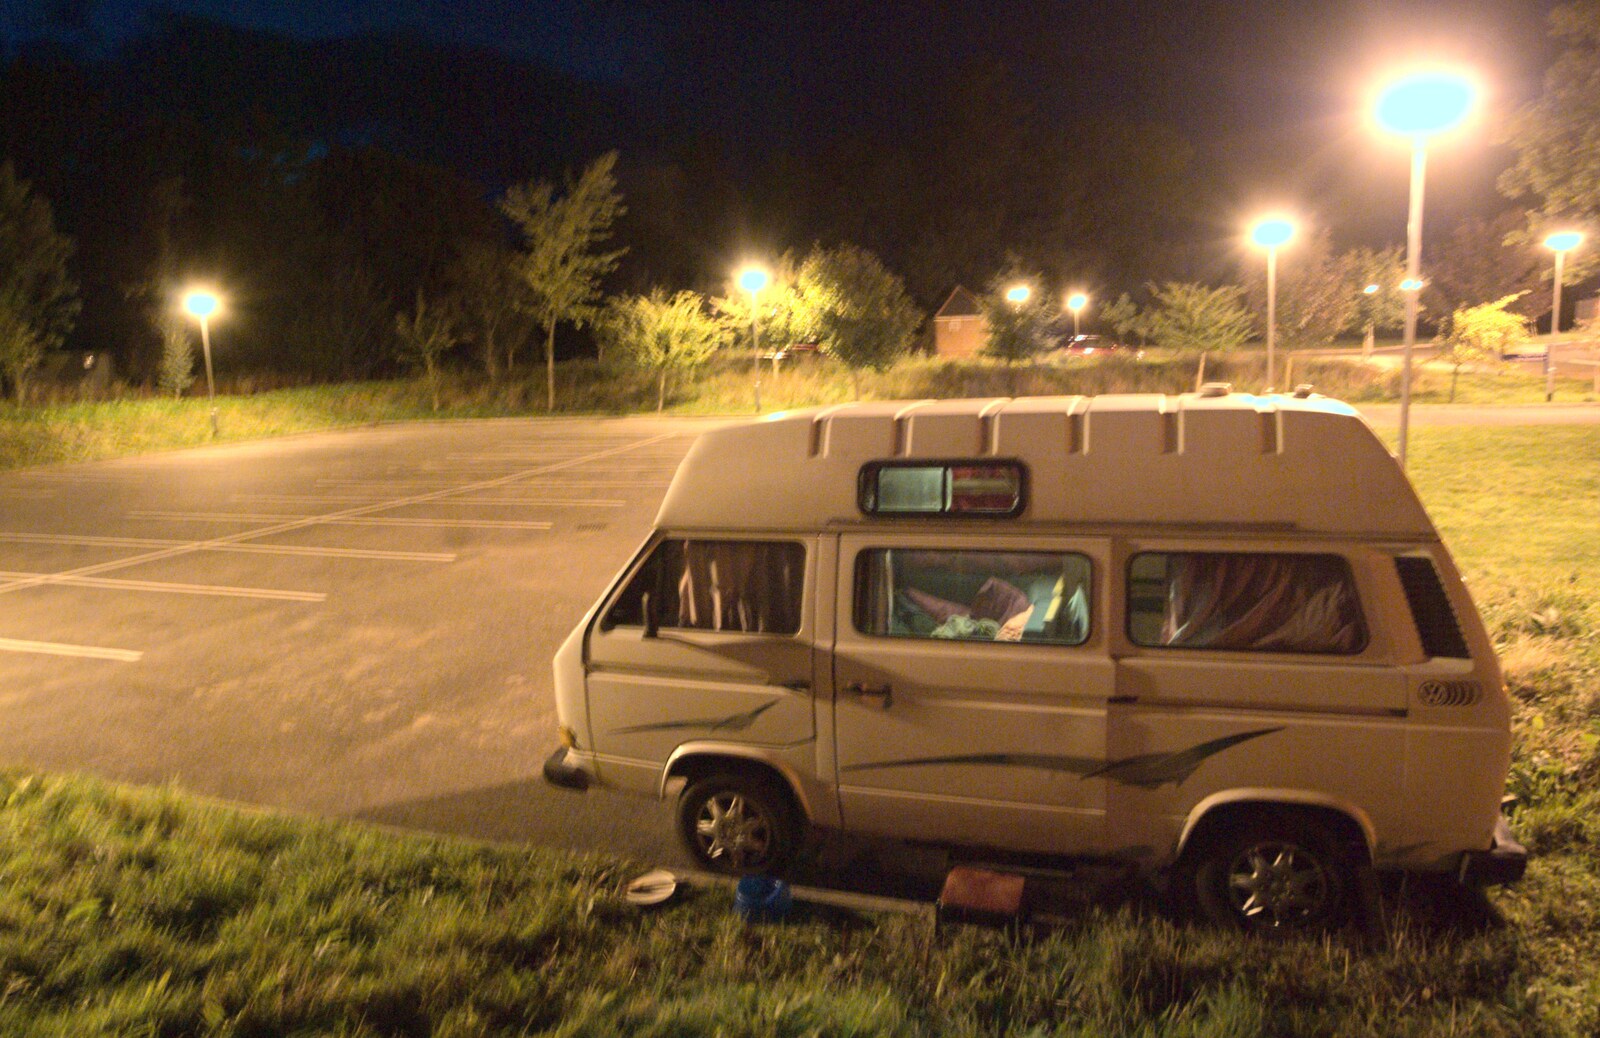 The camper van considers its night-time fate from The 1940s Steam Train Weekend, Holt, Norfolk - 18th September 2011